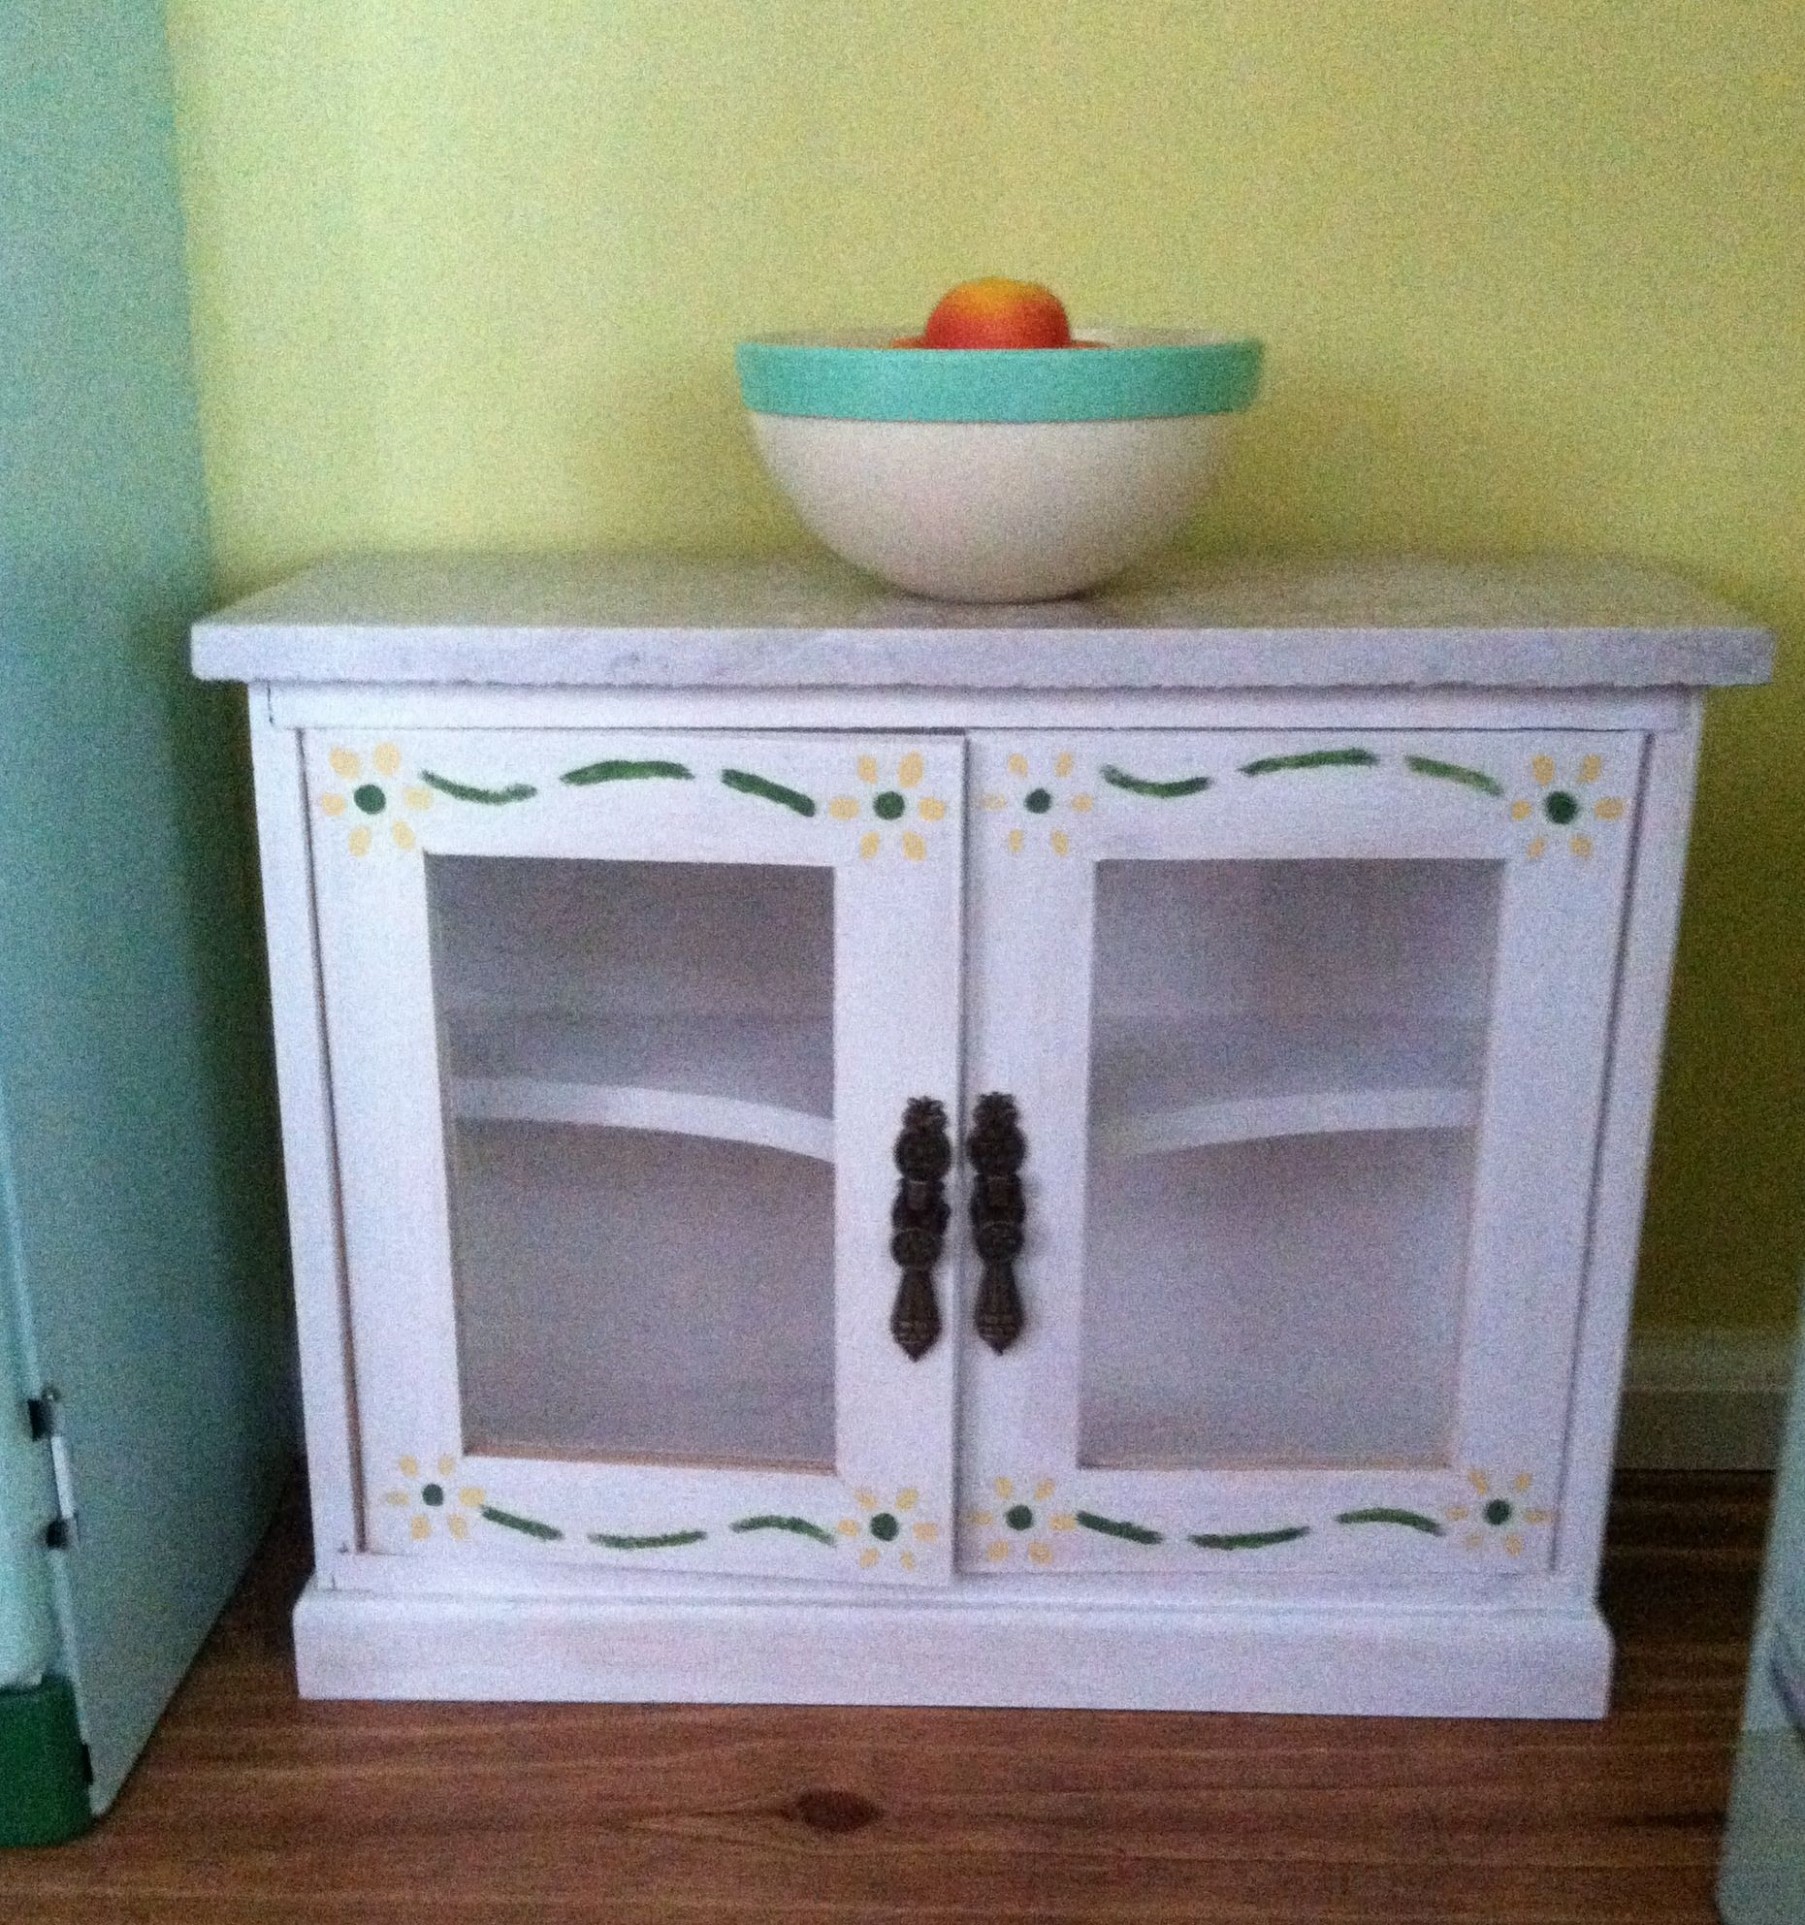 The Cabinet/cupboard For The New Kitchen. The Cabinet Is ..